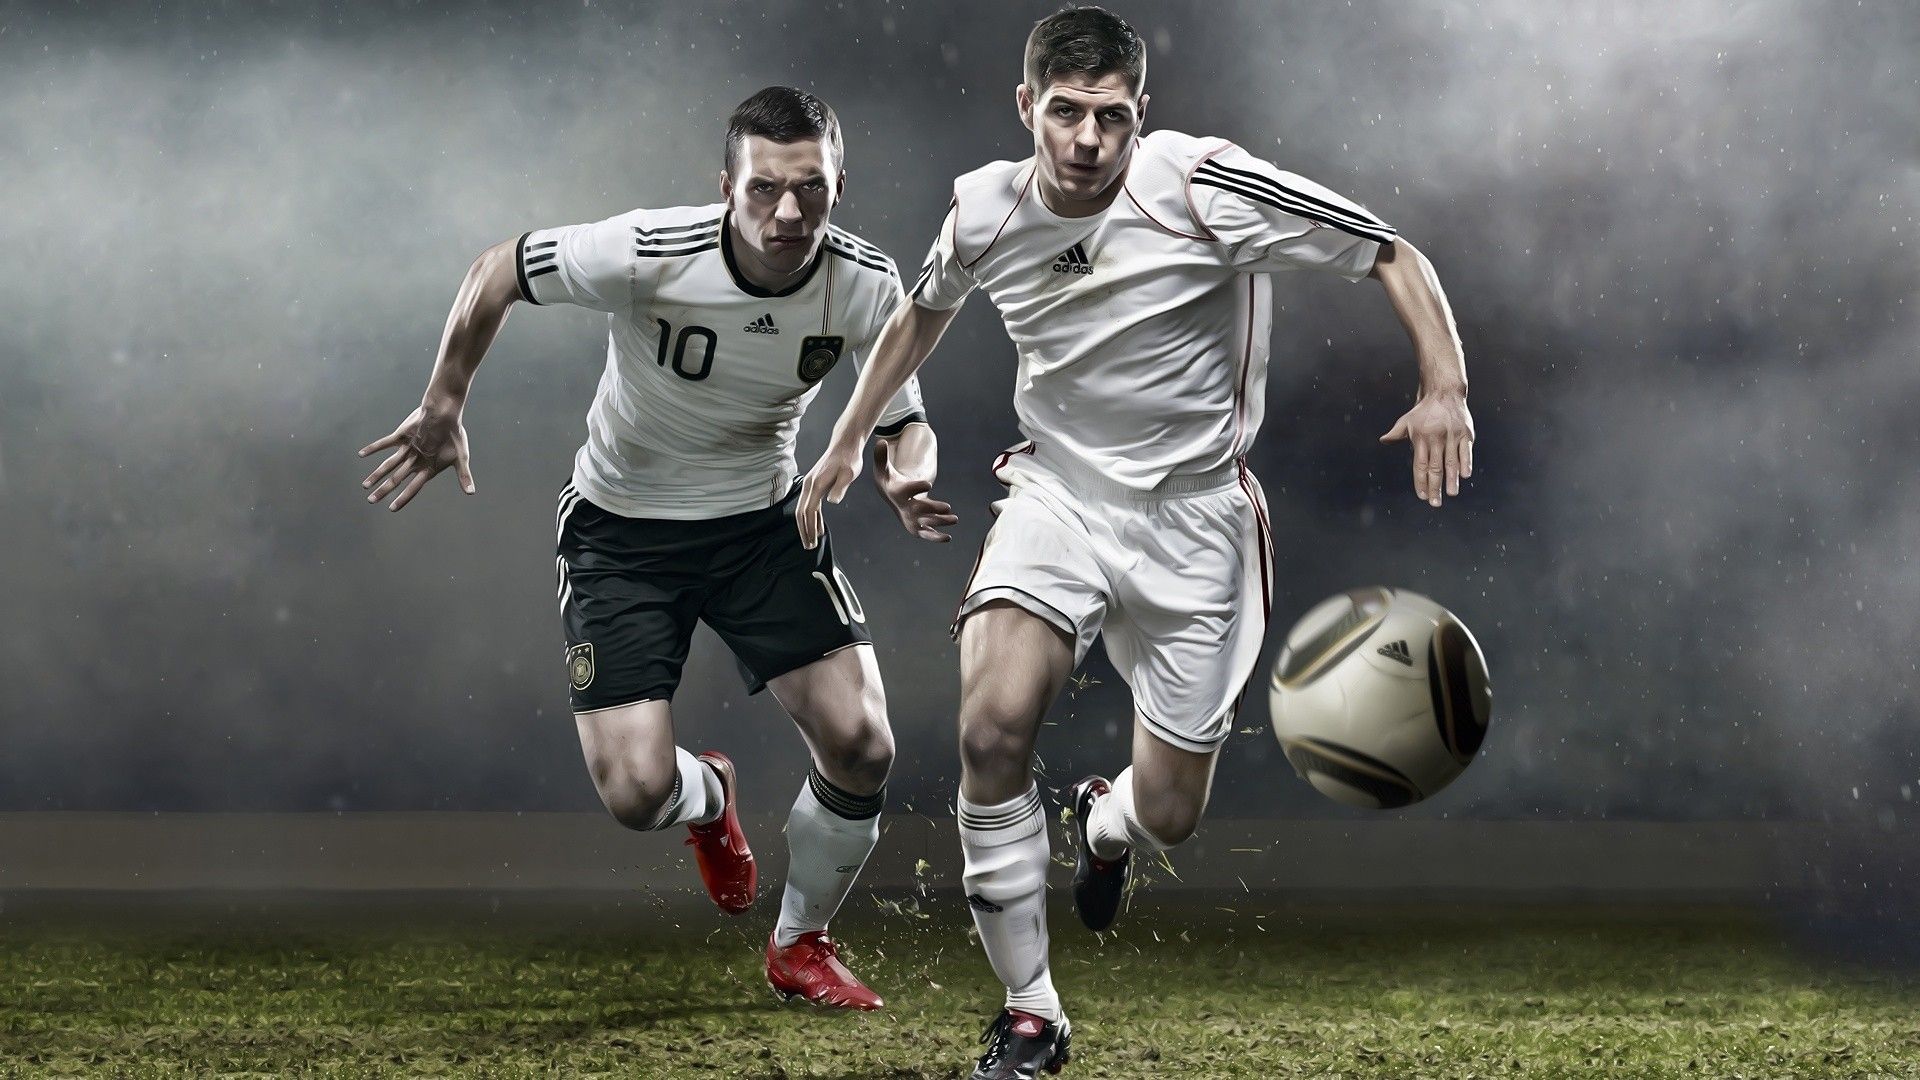 Soccer Games Images Wallpapers